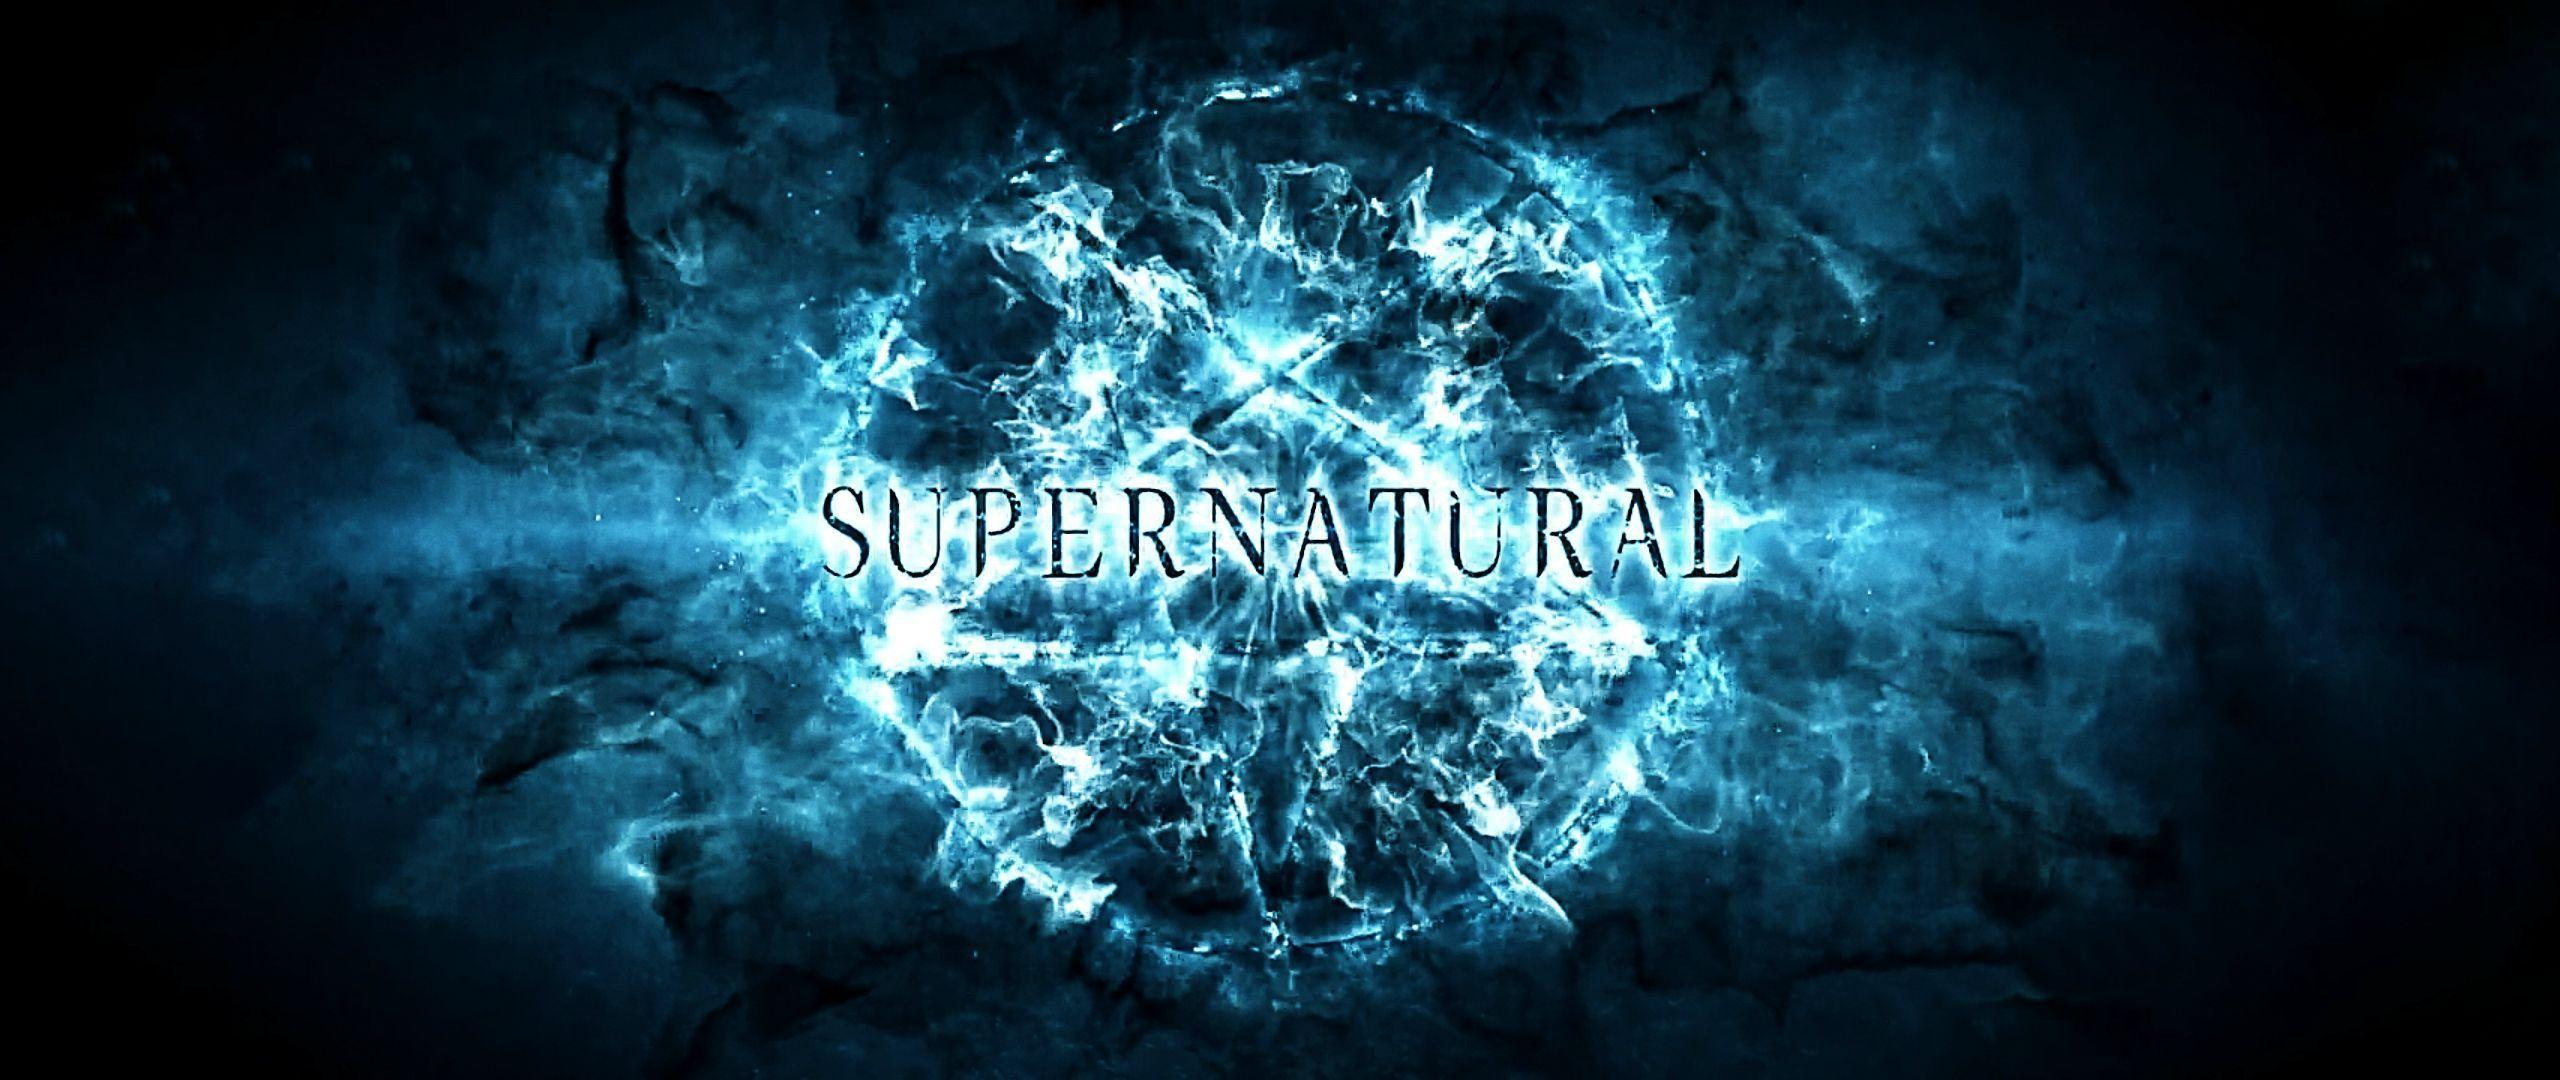 Imgur: The most awesome image on the Internet. Supernatural, Supernatural episodes, Title card